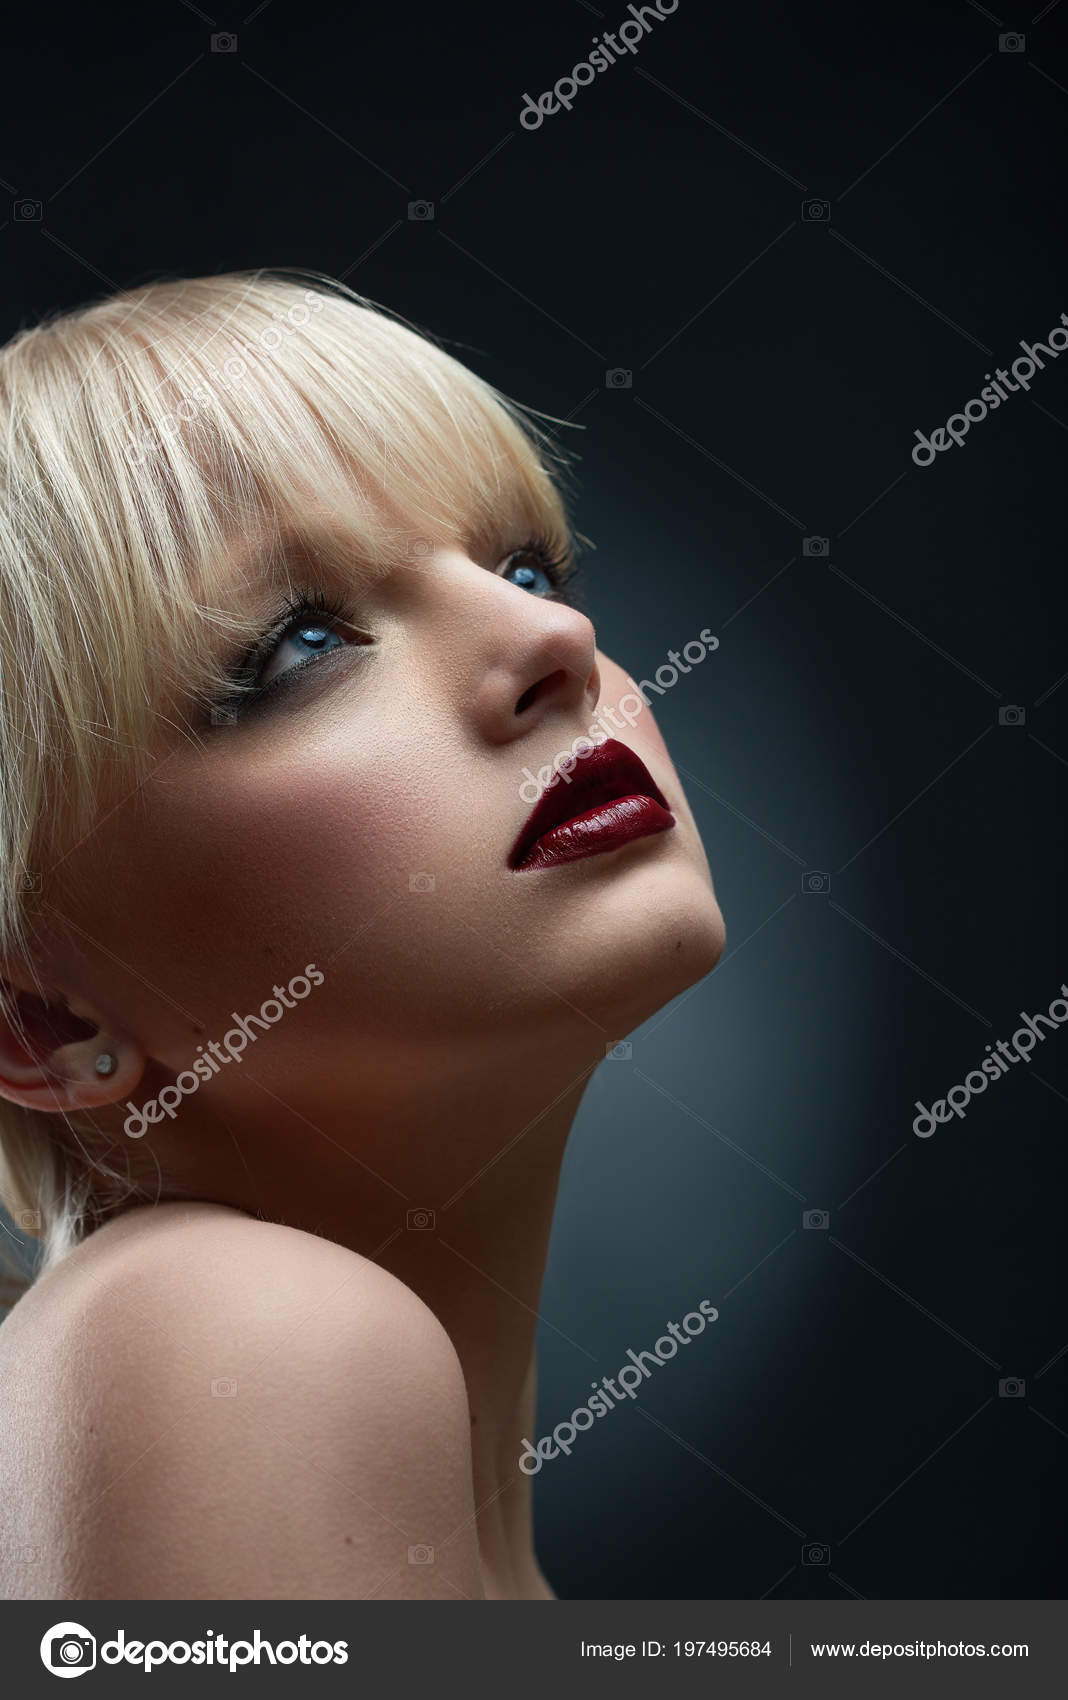 Model With Blonde Hair And Blue Eyes Studio Photo Of Model